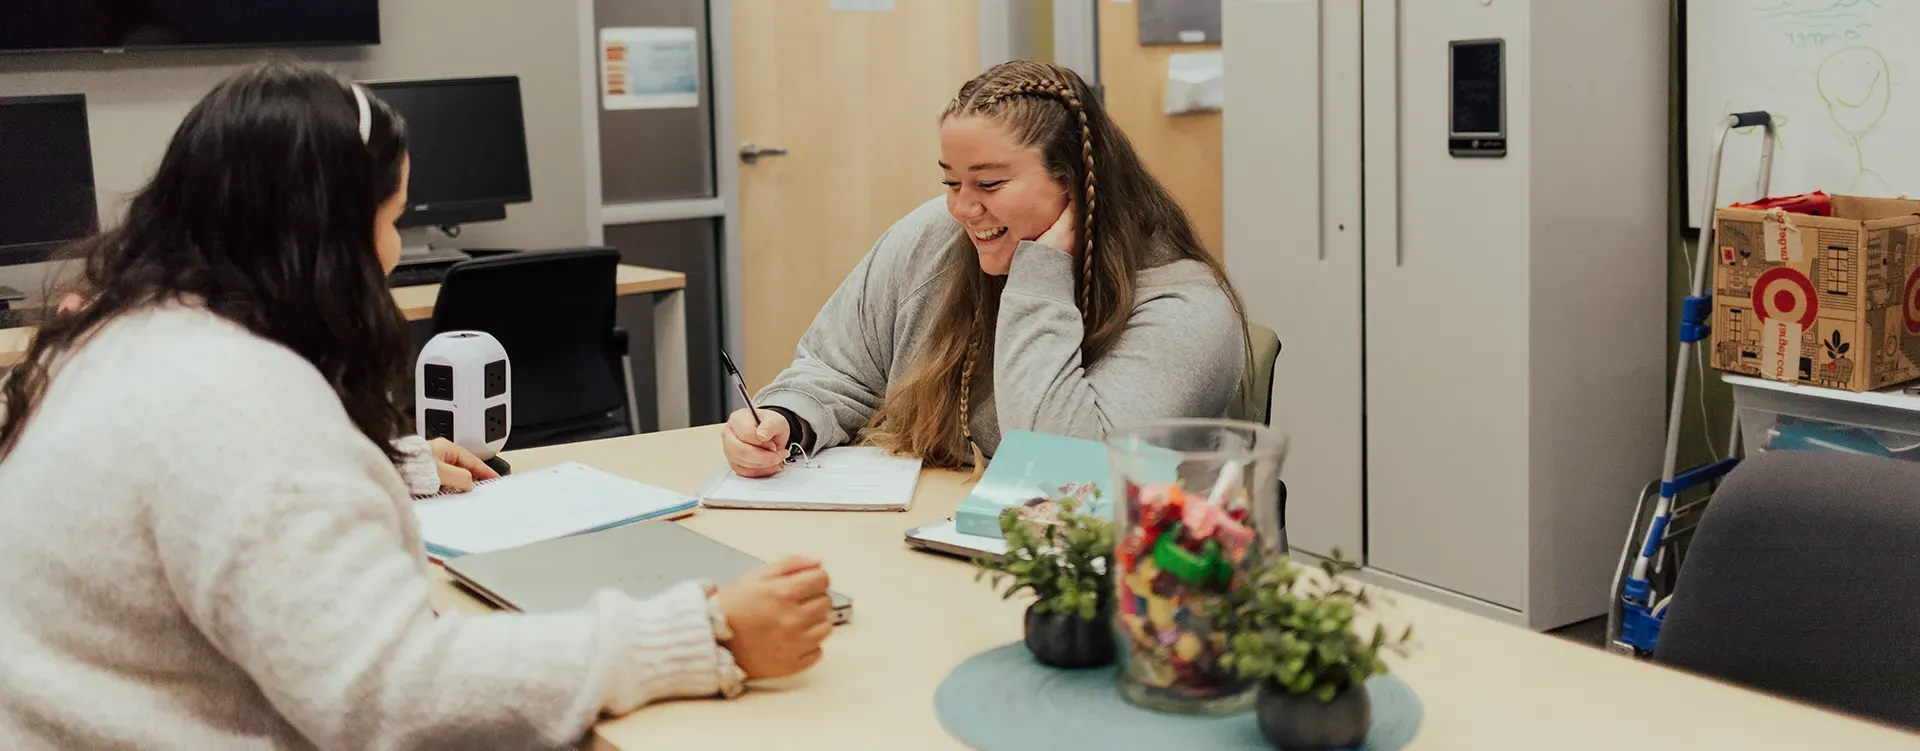 Thomas College provides peer tutoring at no cost to current students in a variety of subjects, including accounting, computer science, economics, finance, history, management, marketing, math, psychology, science, sociology, and writing.